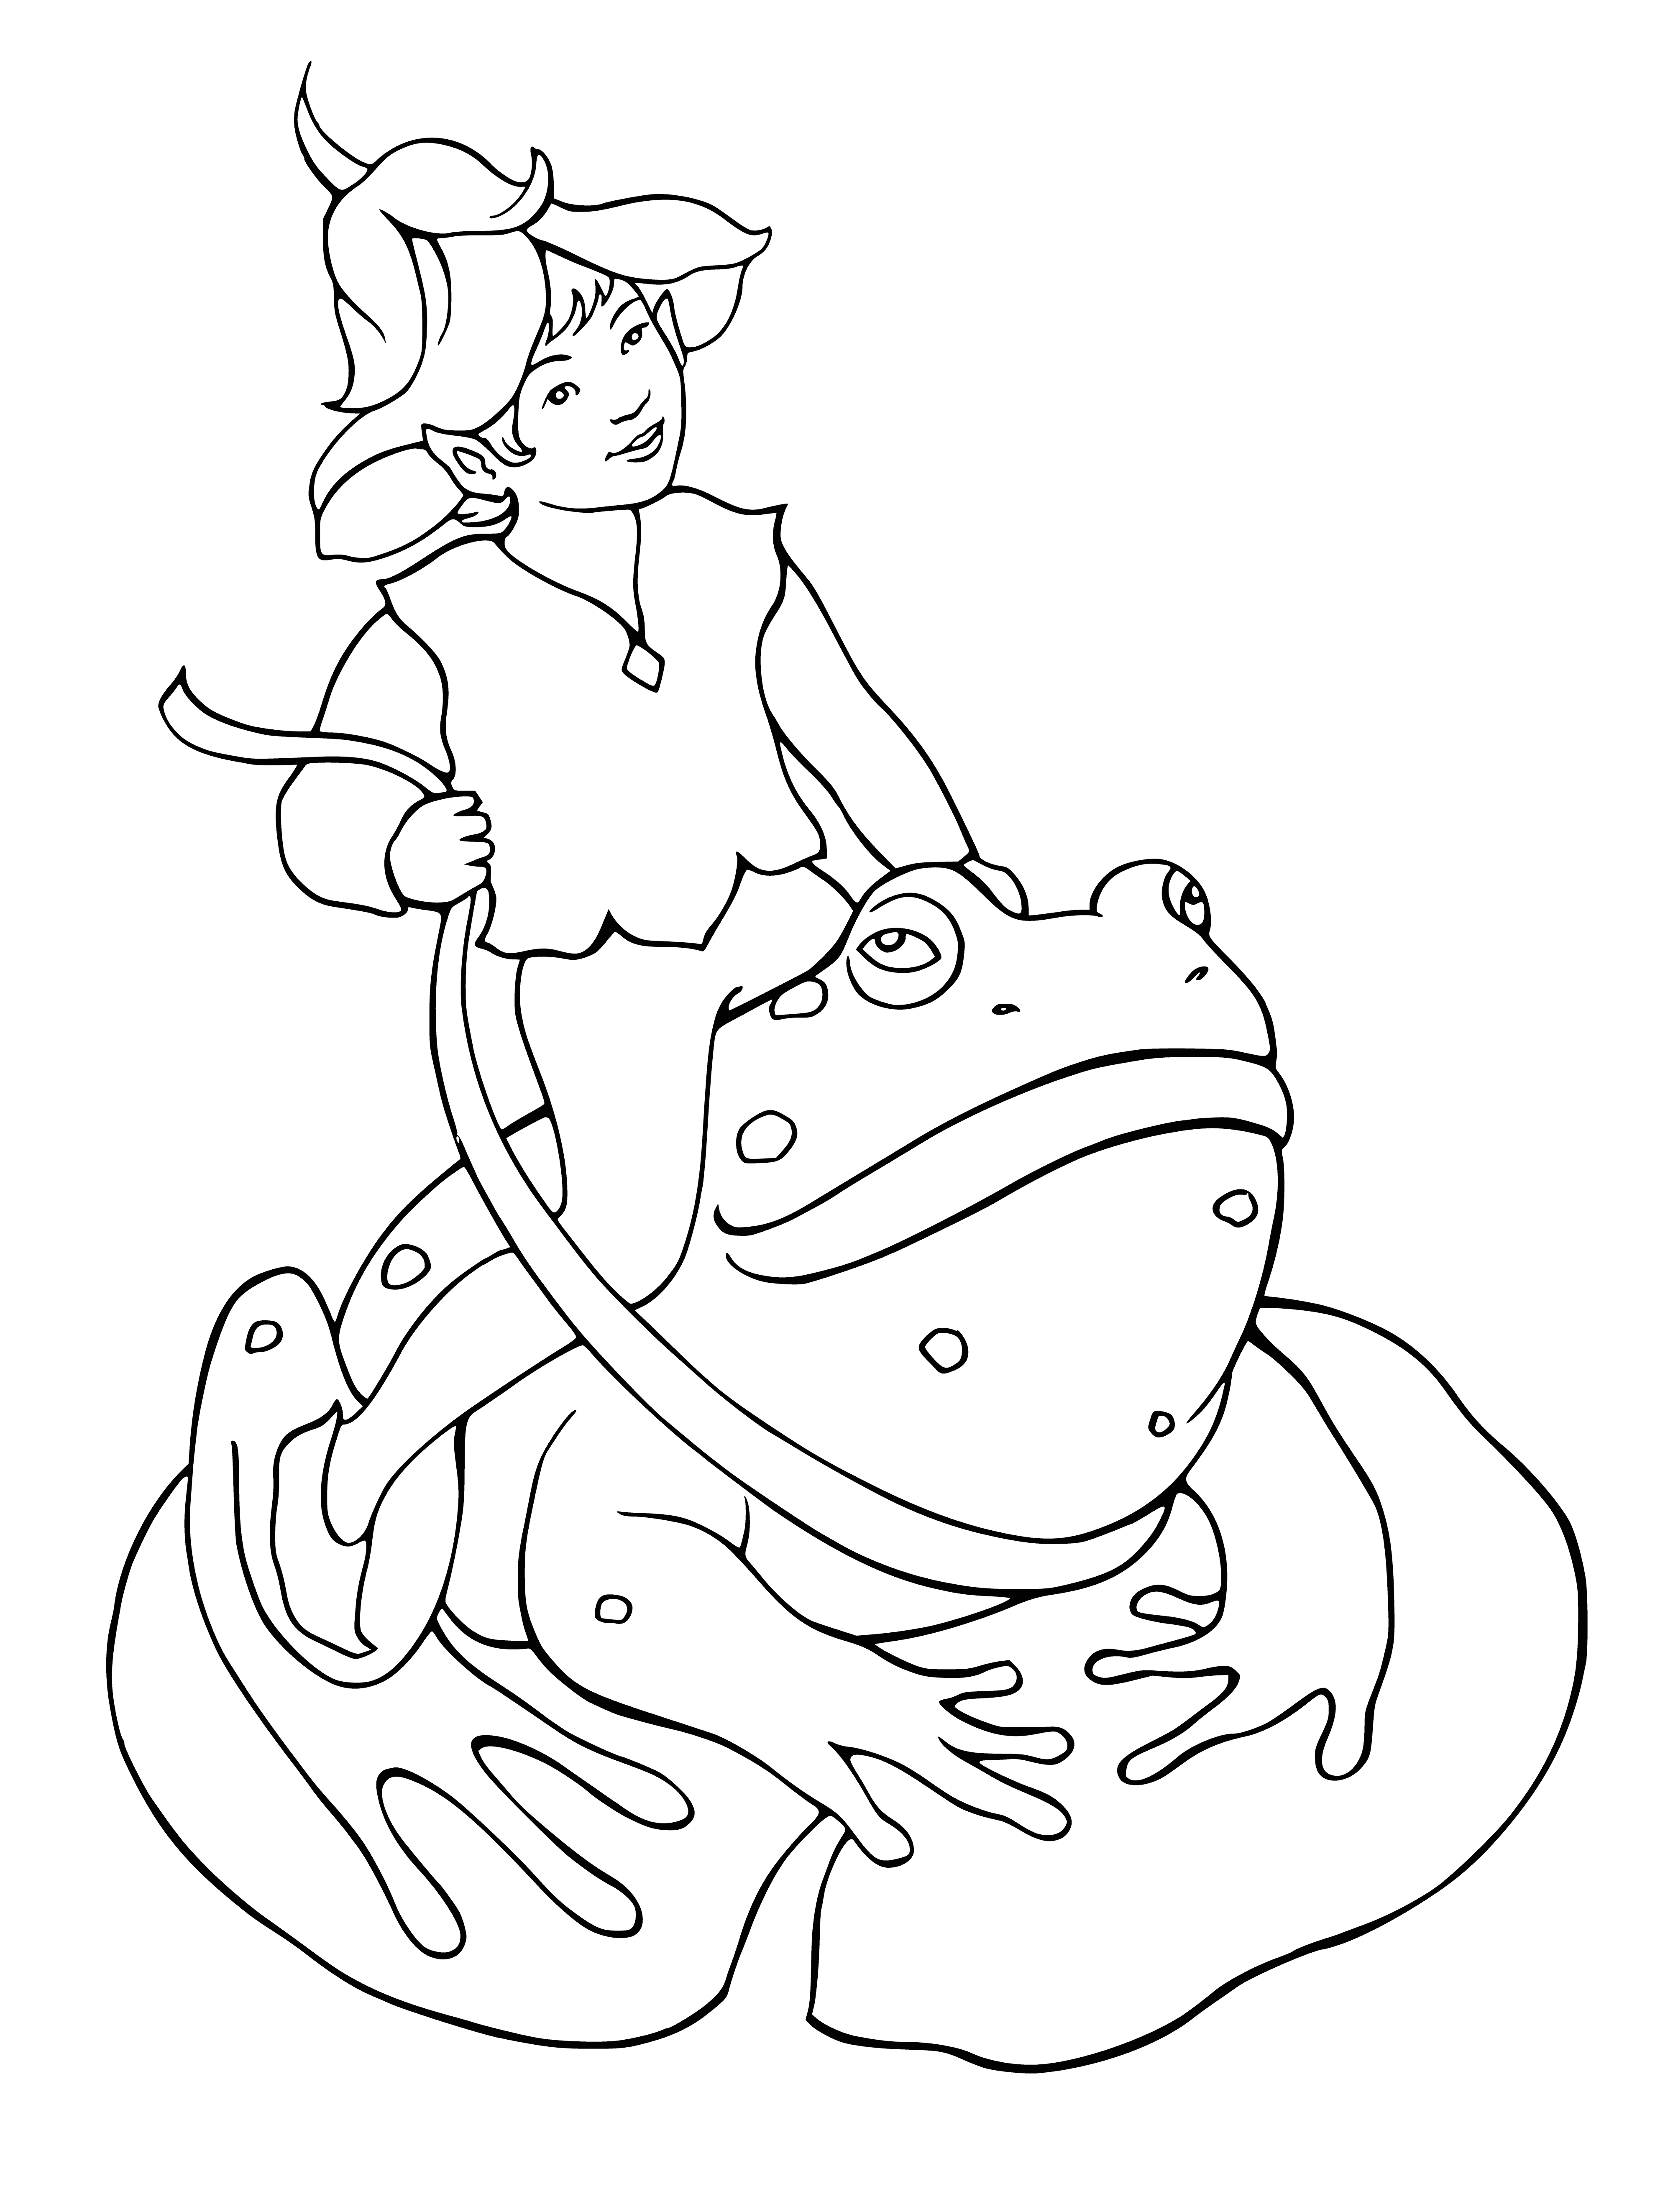 Elf riding a toad coloring page